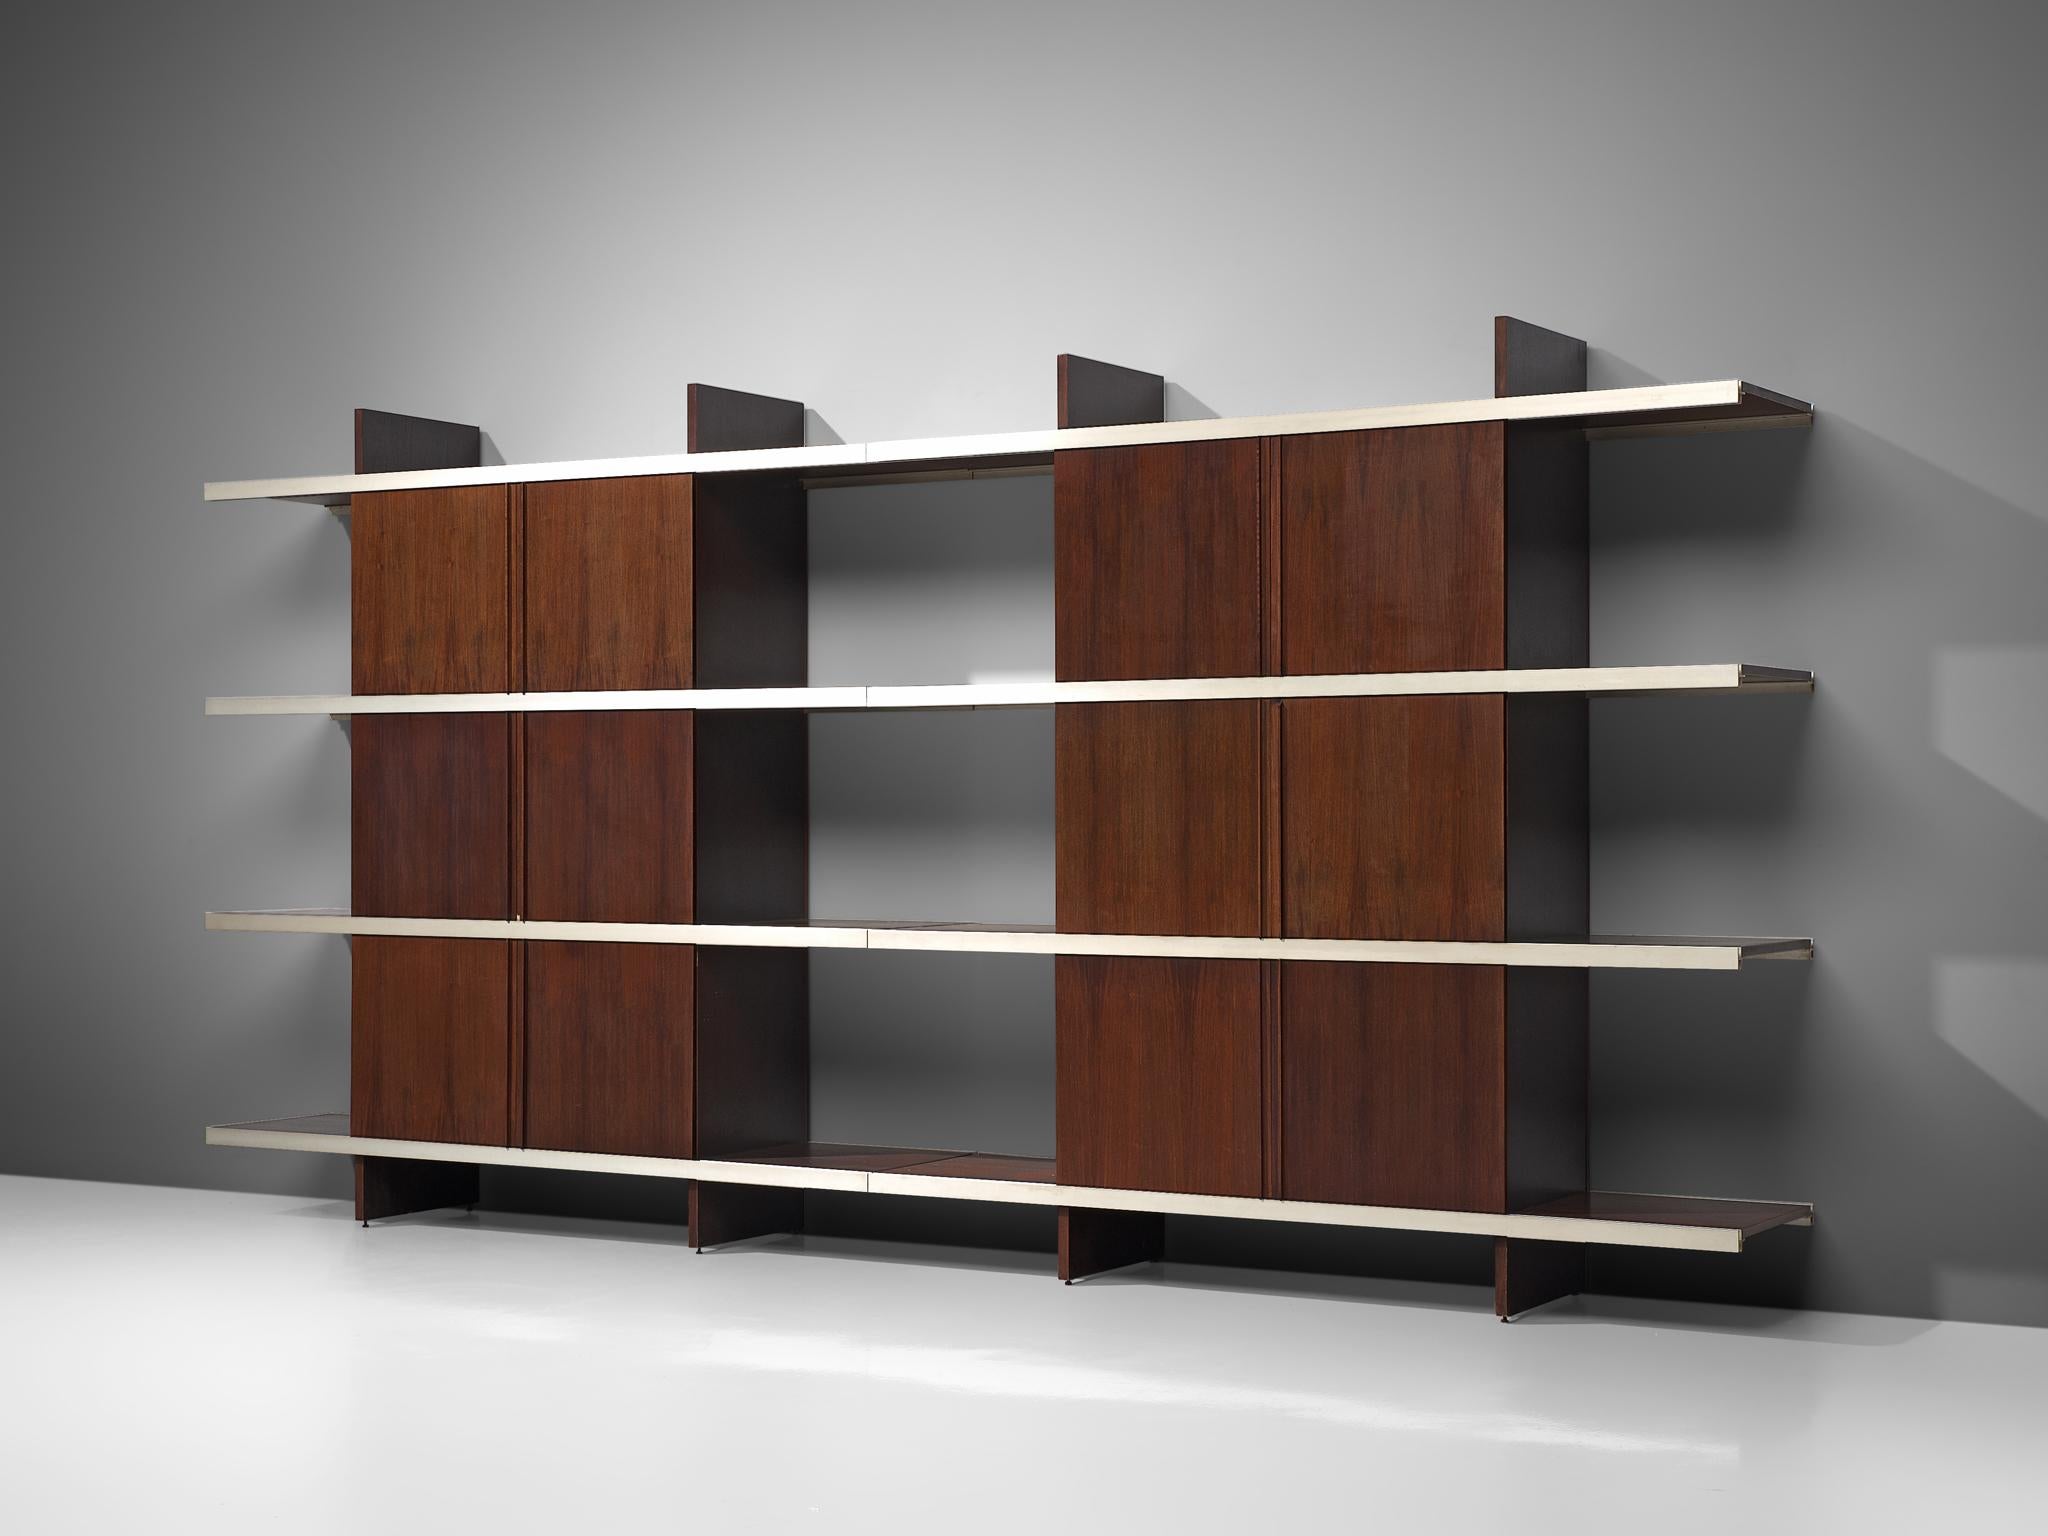 Angelo Mangiarotti for Poltronova, cabinets from the 'Multiuse Series', wood, aluminum, Italy, 1965

Beautiful bookcases or cabinets of the 'Multiuse Series' that Mangiarotti designed for Poltronova in 1965. Known for his strong designs with marble